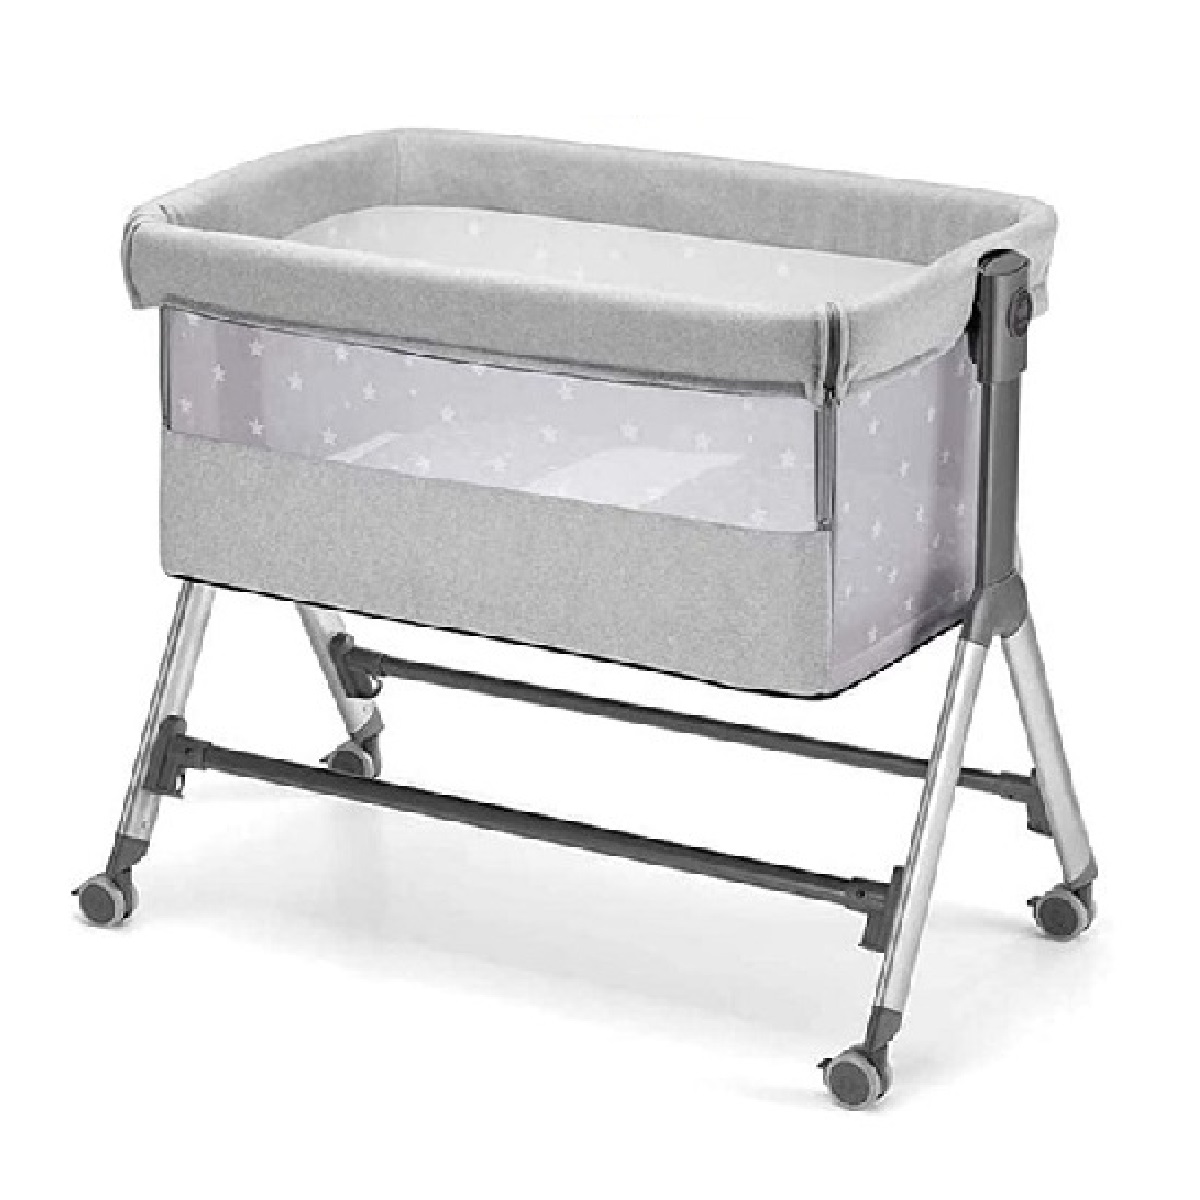 Cam - Sempreconte Baby Co Bed Cradle, Baby cot, Rocking Cradle, Convertible, foldable,  Essential sleeping portable, Crib, bedside - Silver Stars